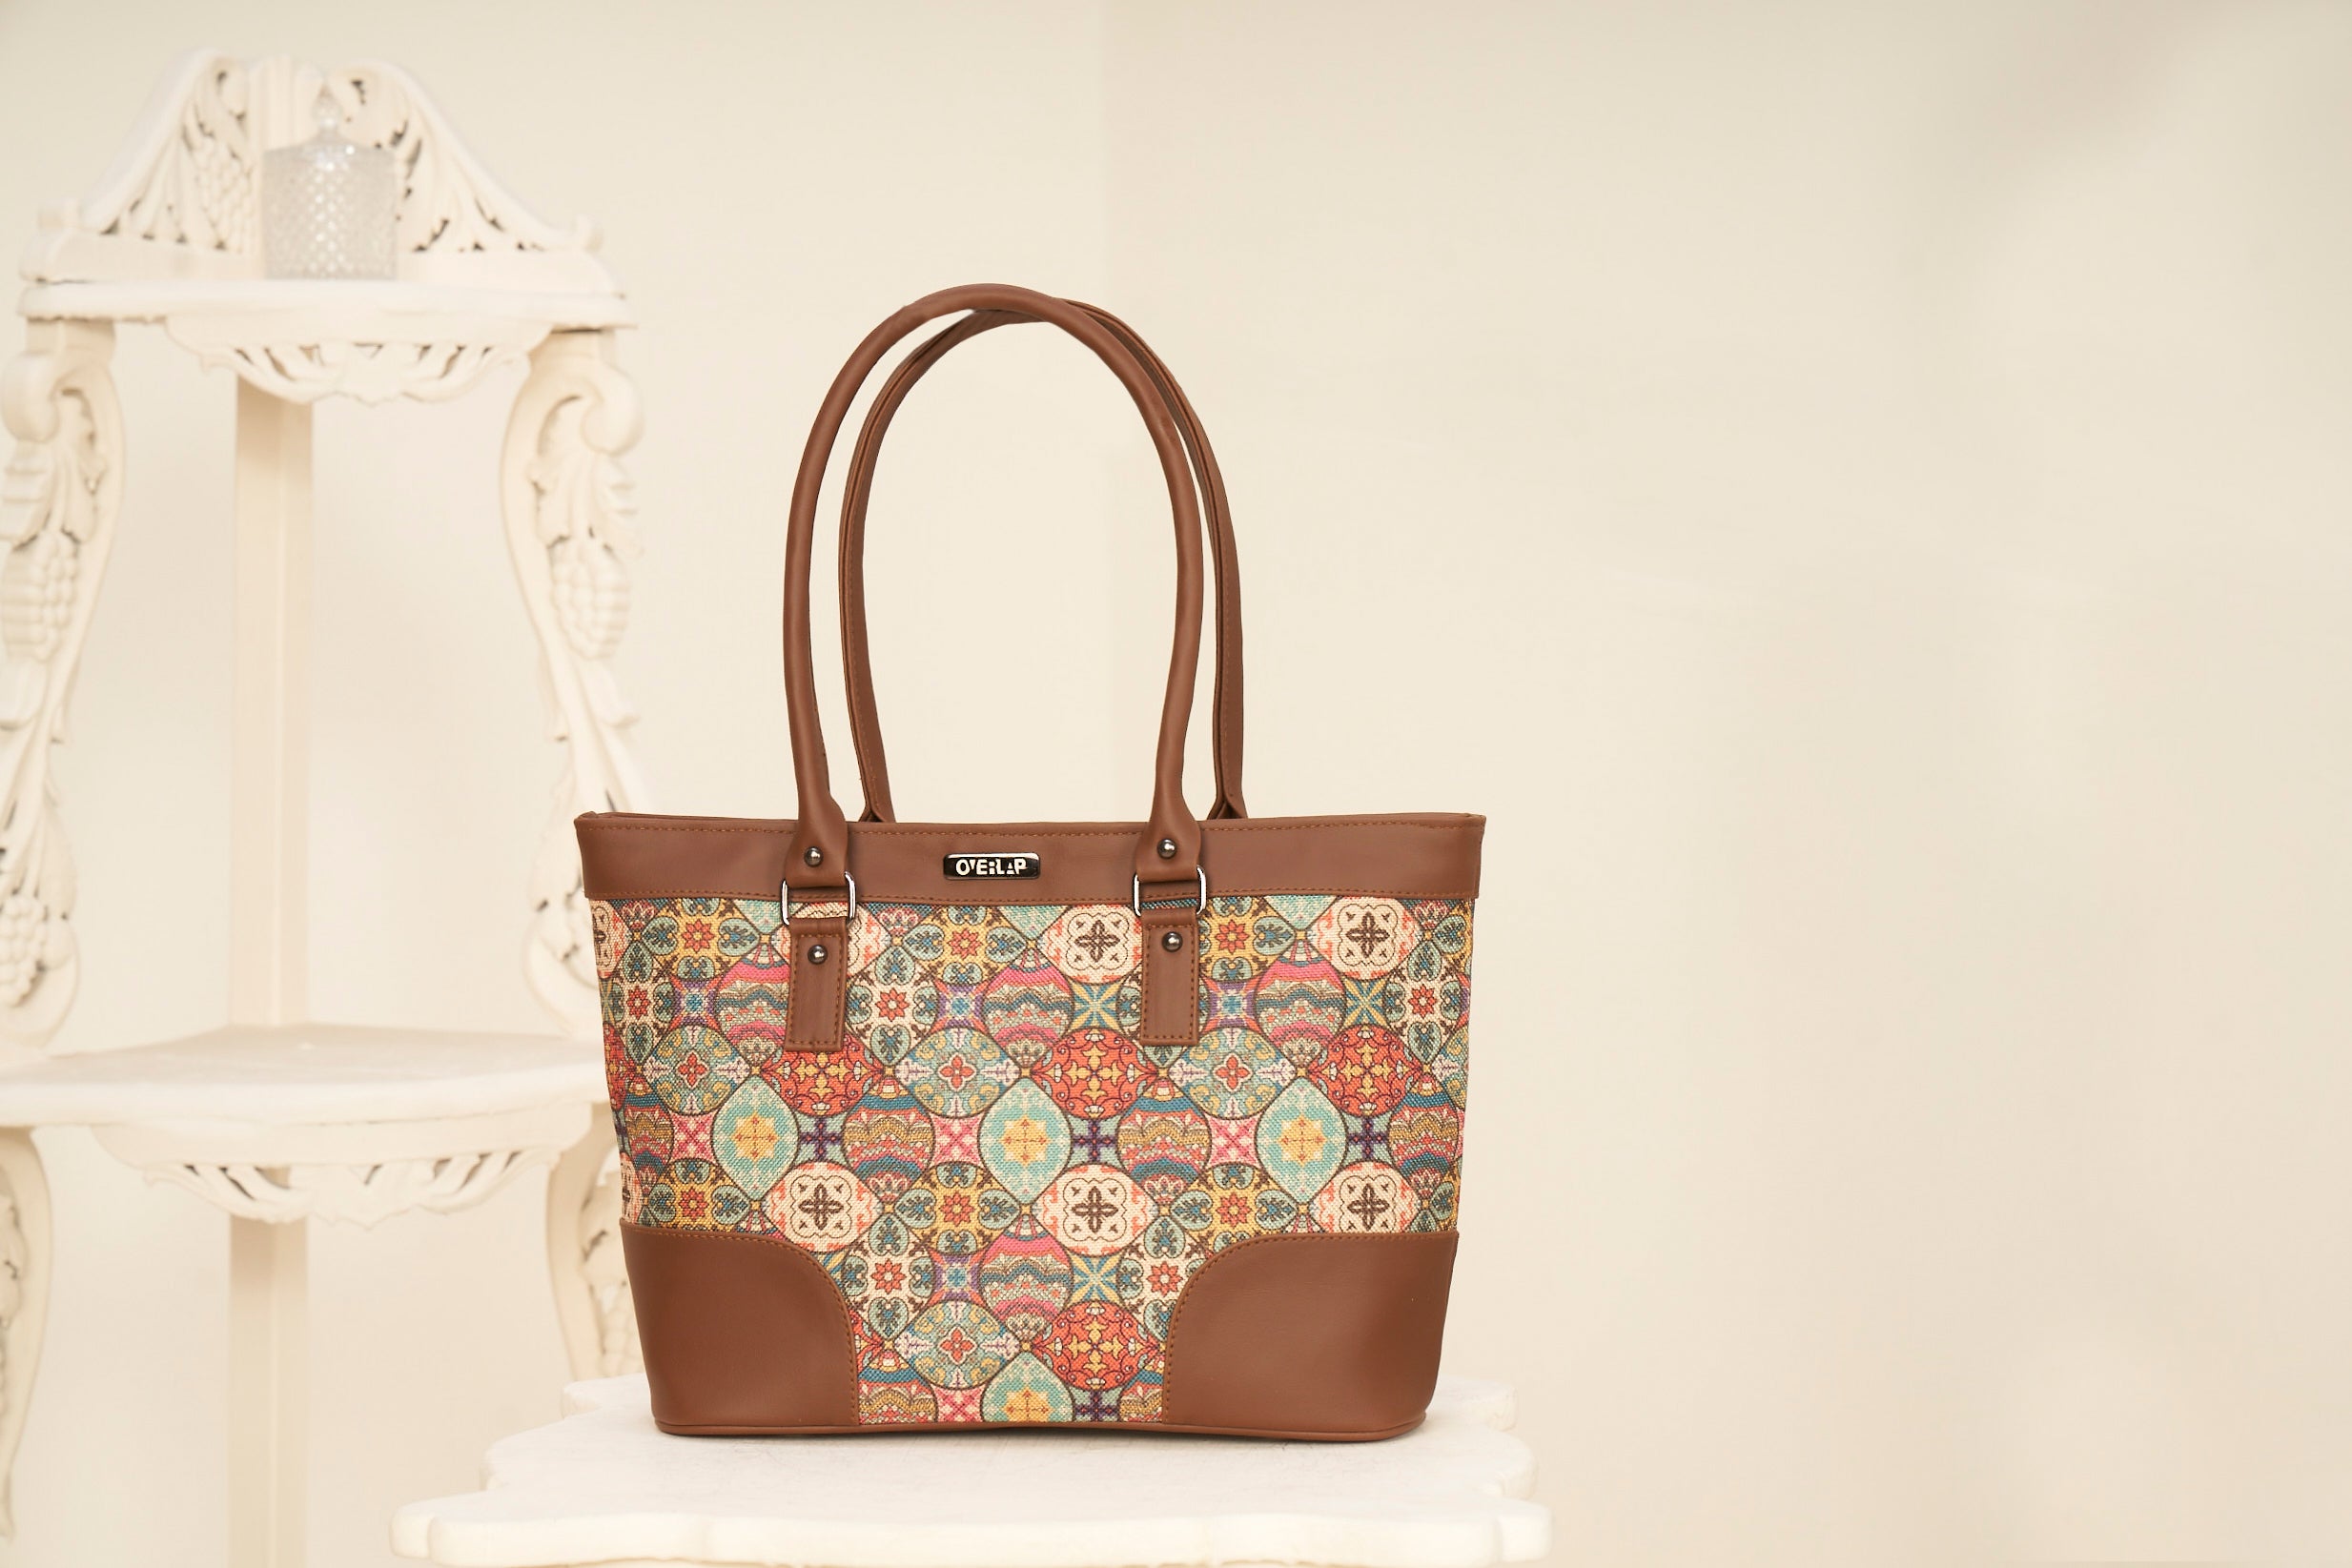 Expressive Utility: Aora 007 - Printed PolyCotton Canvas Tote for Trendsetters